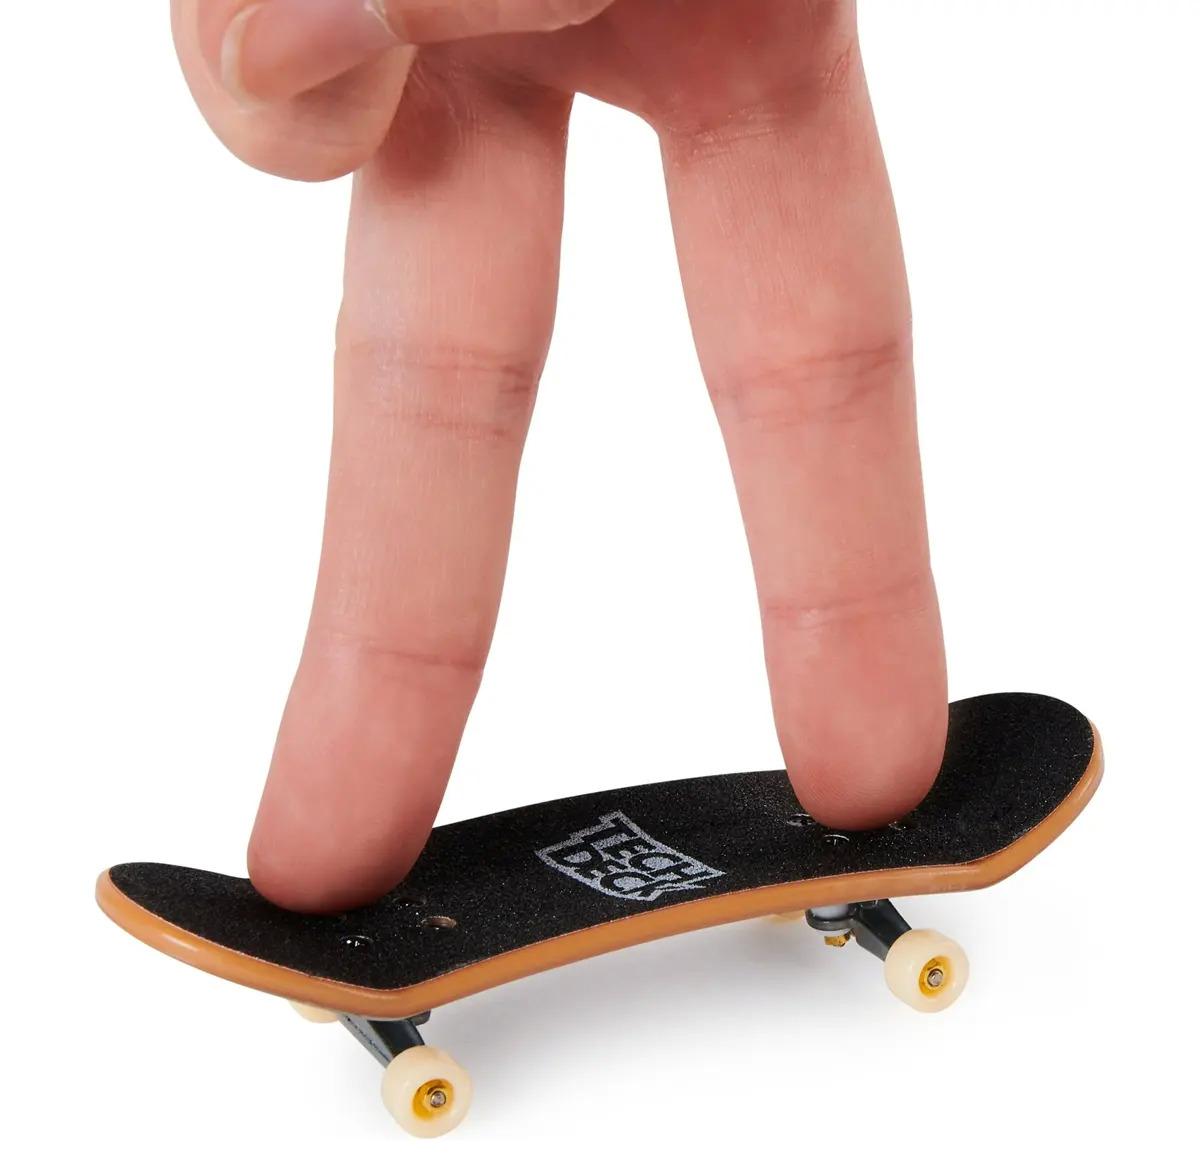 Tech Deck DLX Pro Collectible Fingerboards 10 Pack for $4.97